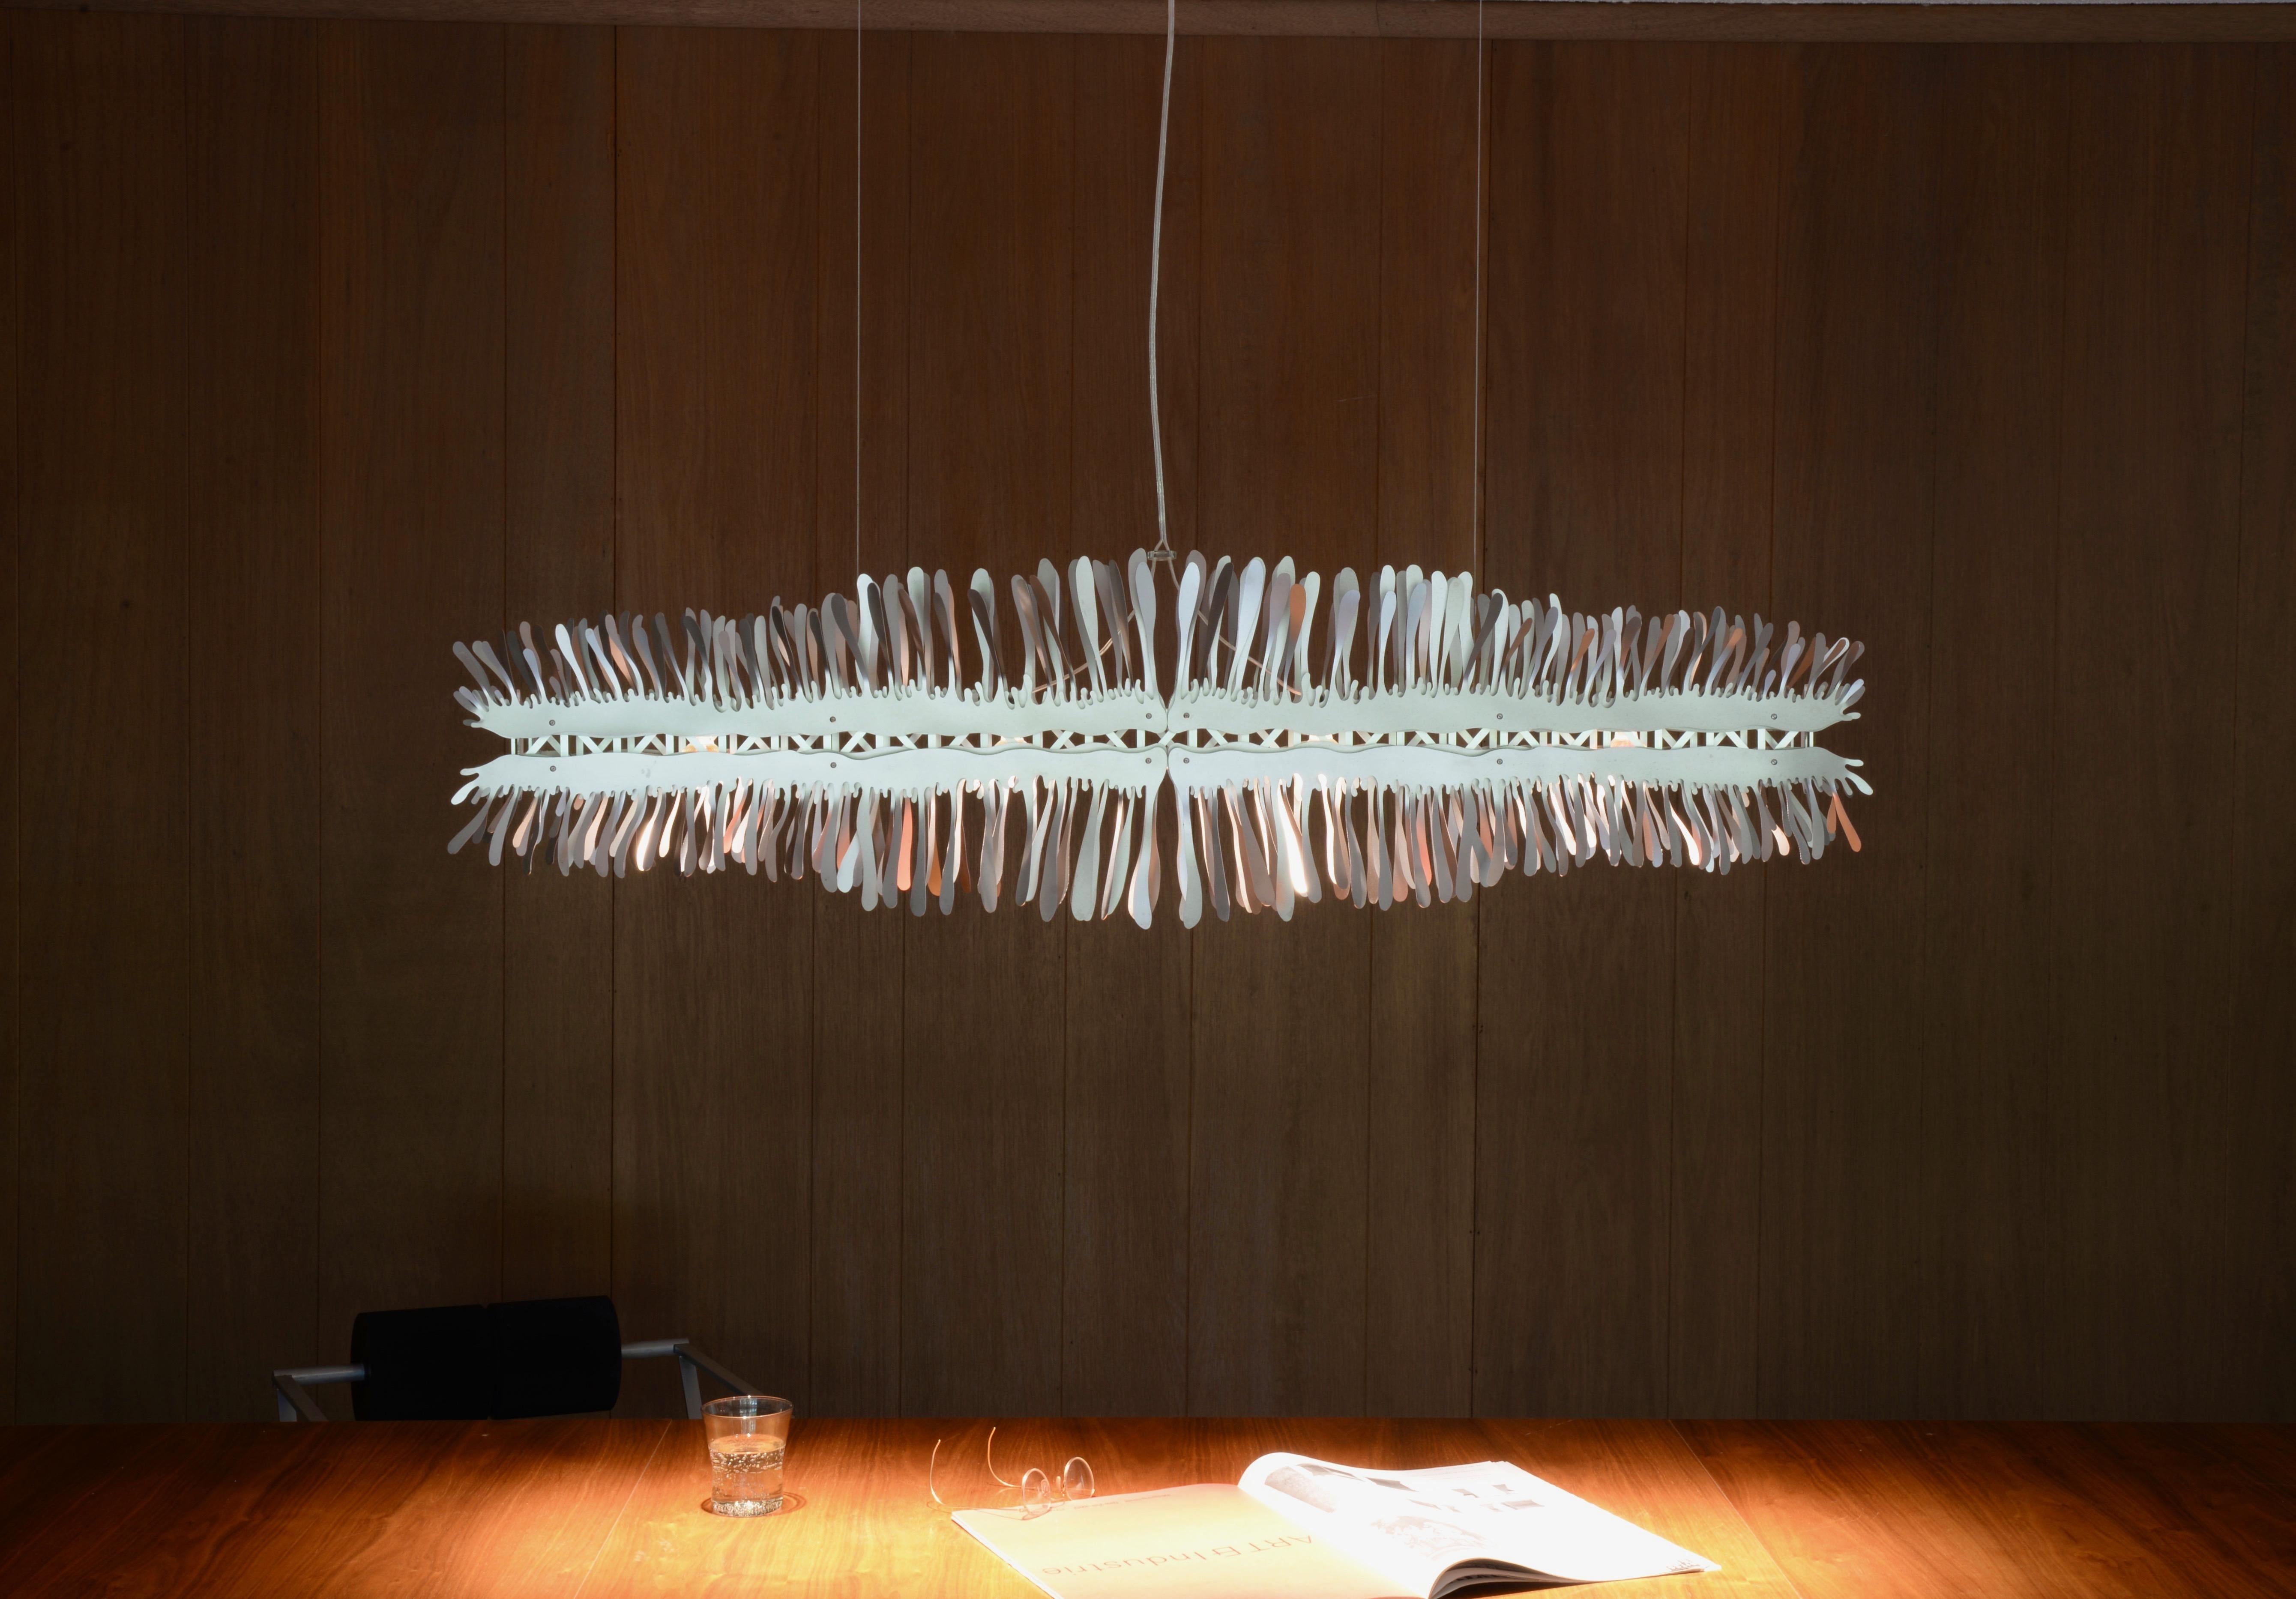 Liquid is a handmade stainless steel and aluminum linear chandelier providing warm direct LED illumination when suspended over a dining table, kitchen island or conference table. The sculptural exterior of Liquid is stainless steel with each element